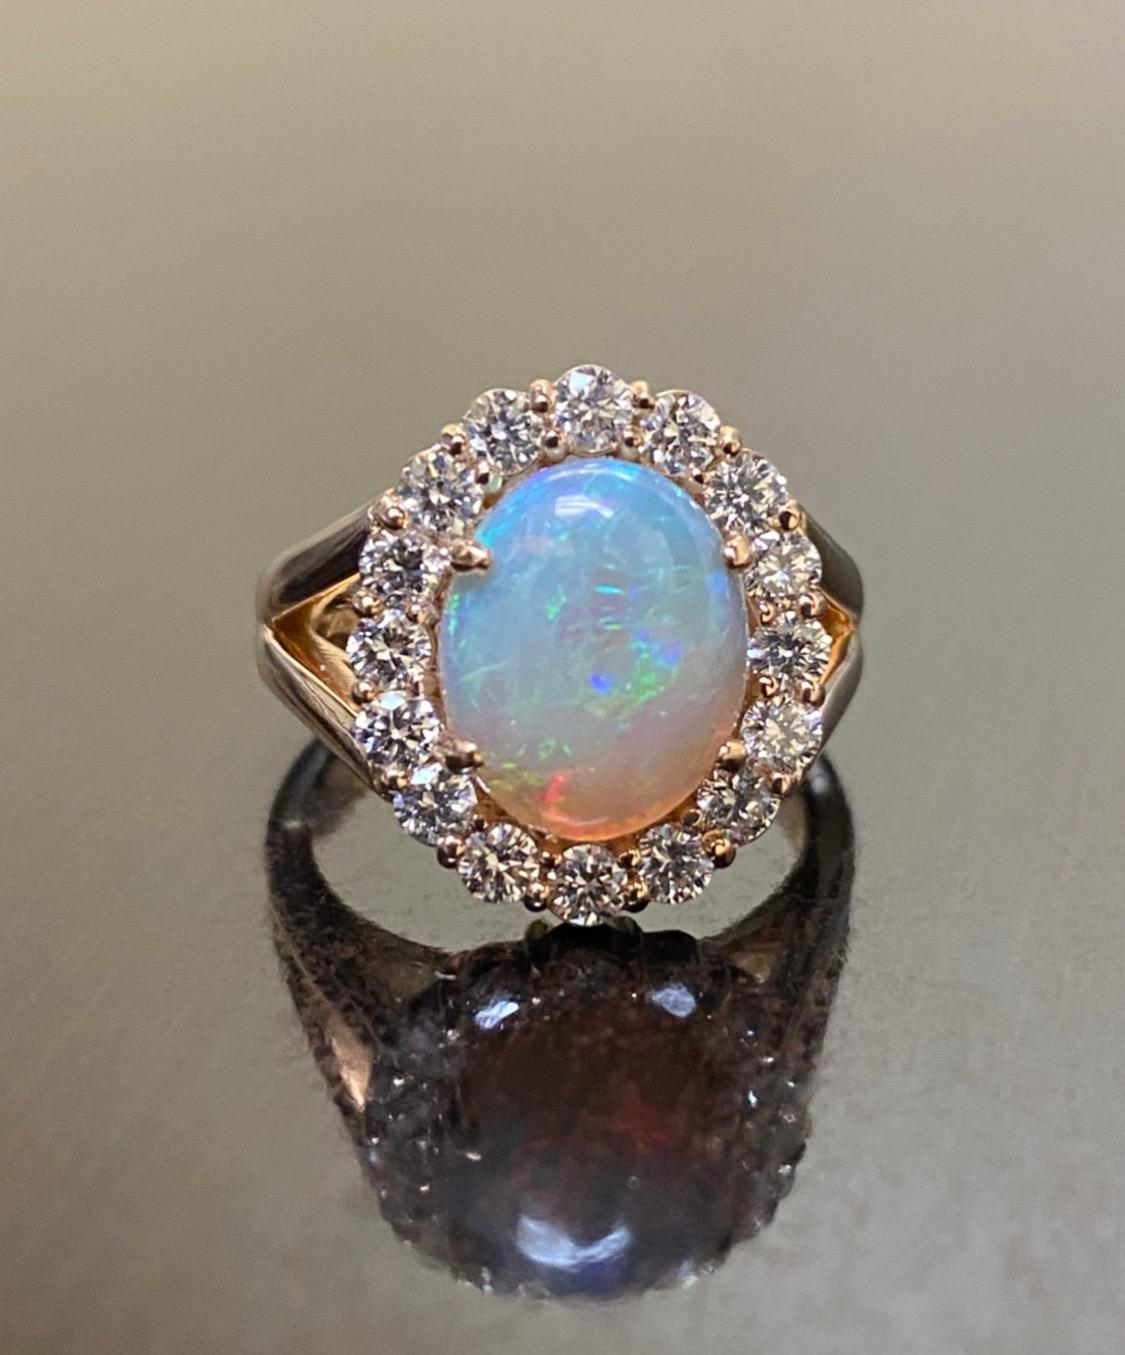 DeKara Designs Collection

Our latest design! An elegant and lustrous Opal cabochon surrounded by beautiful diamonds in a halo setting.

Metal- 18K Rose Gold, .750.

Stones- Center Features an Oval Fiery Australian Opal Cabochon Cut 2.40-2.60 Carats